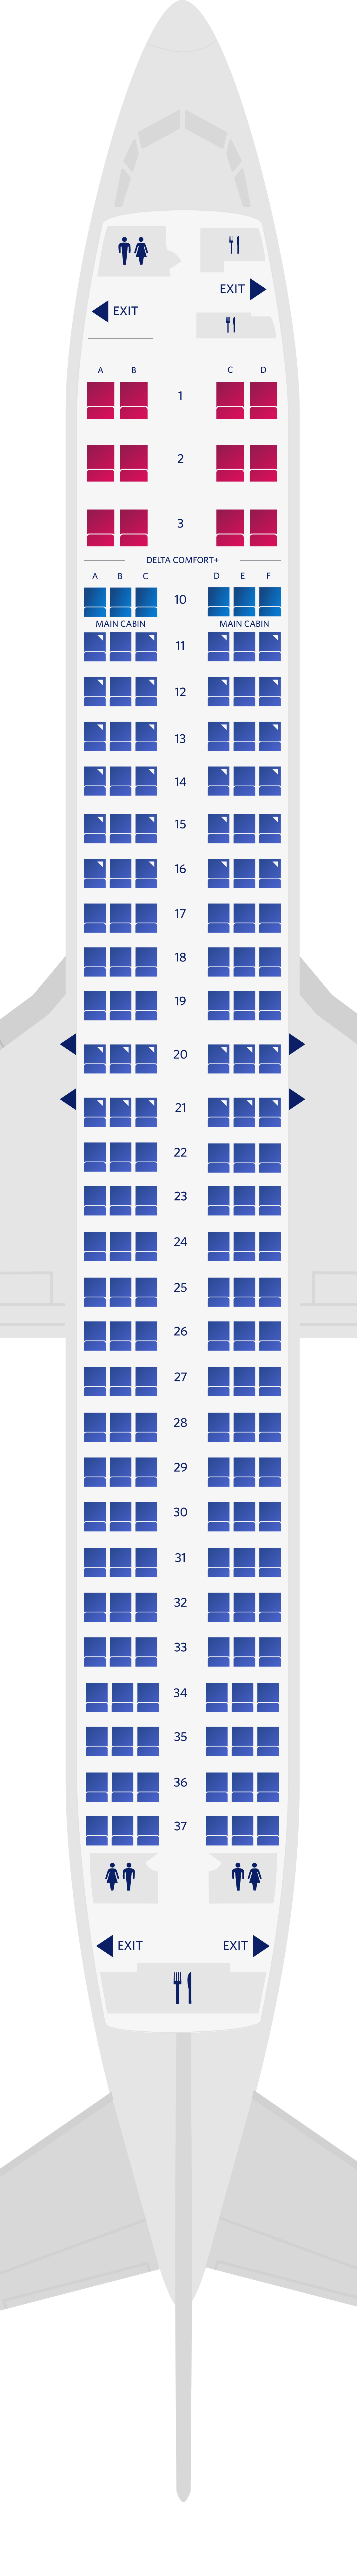 Delta Airlines Aircraft Seating Charts Brokeasshome